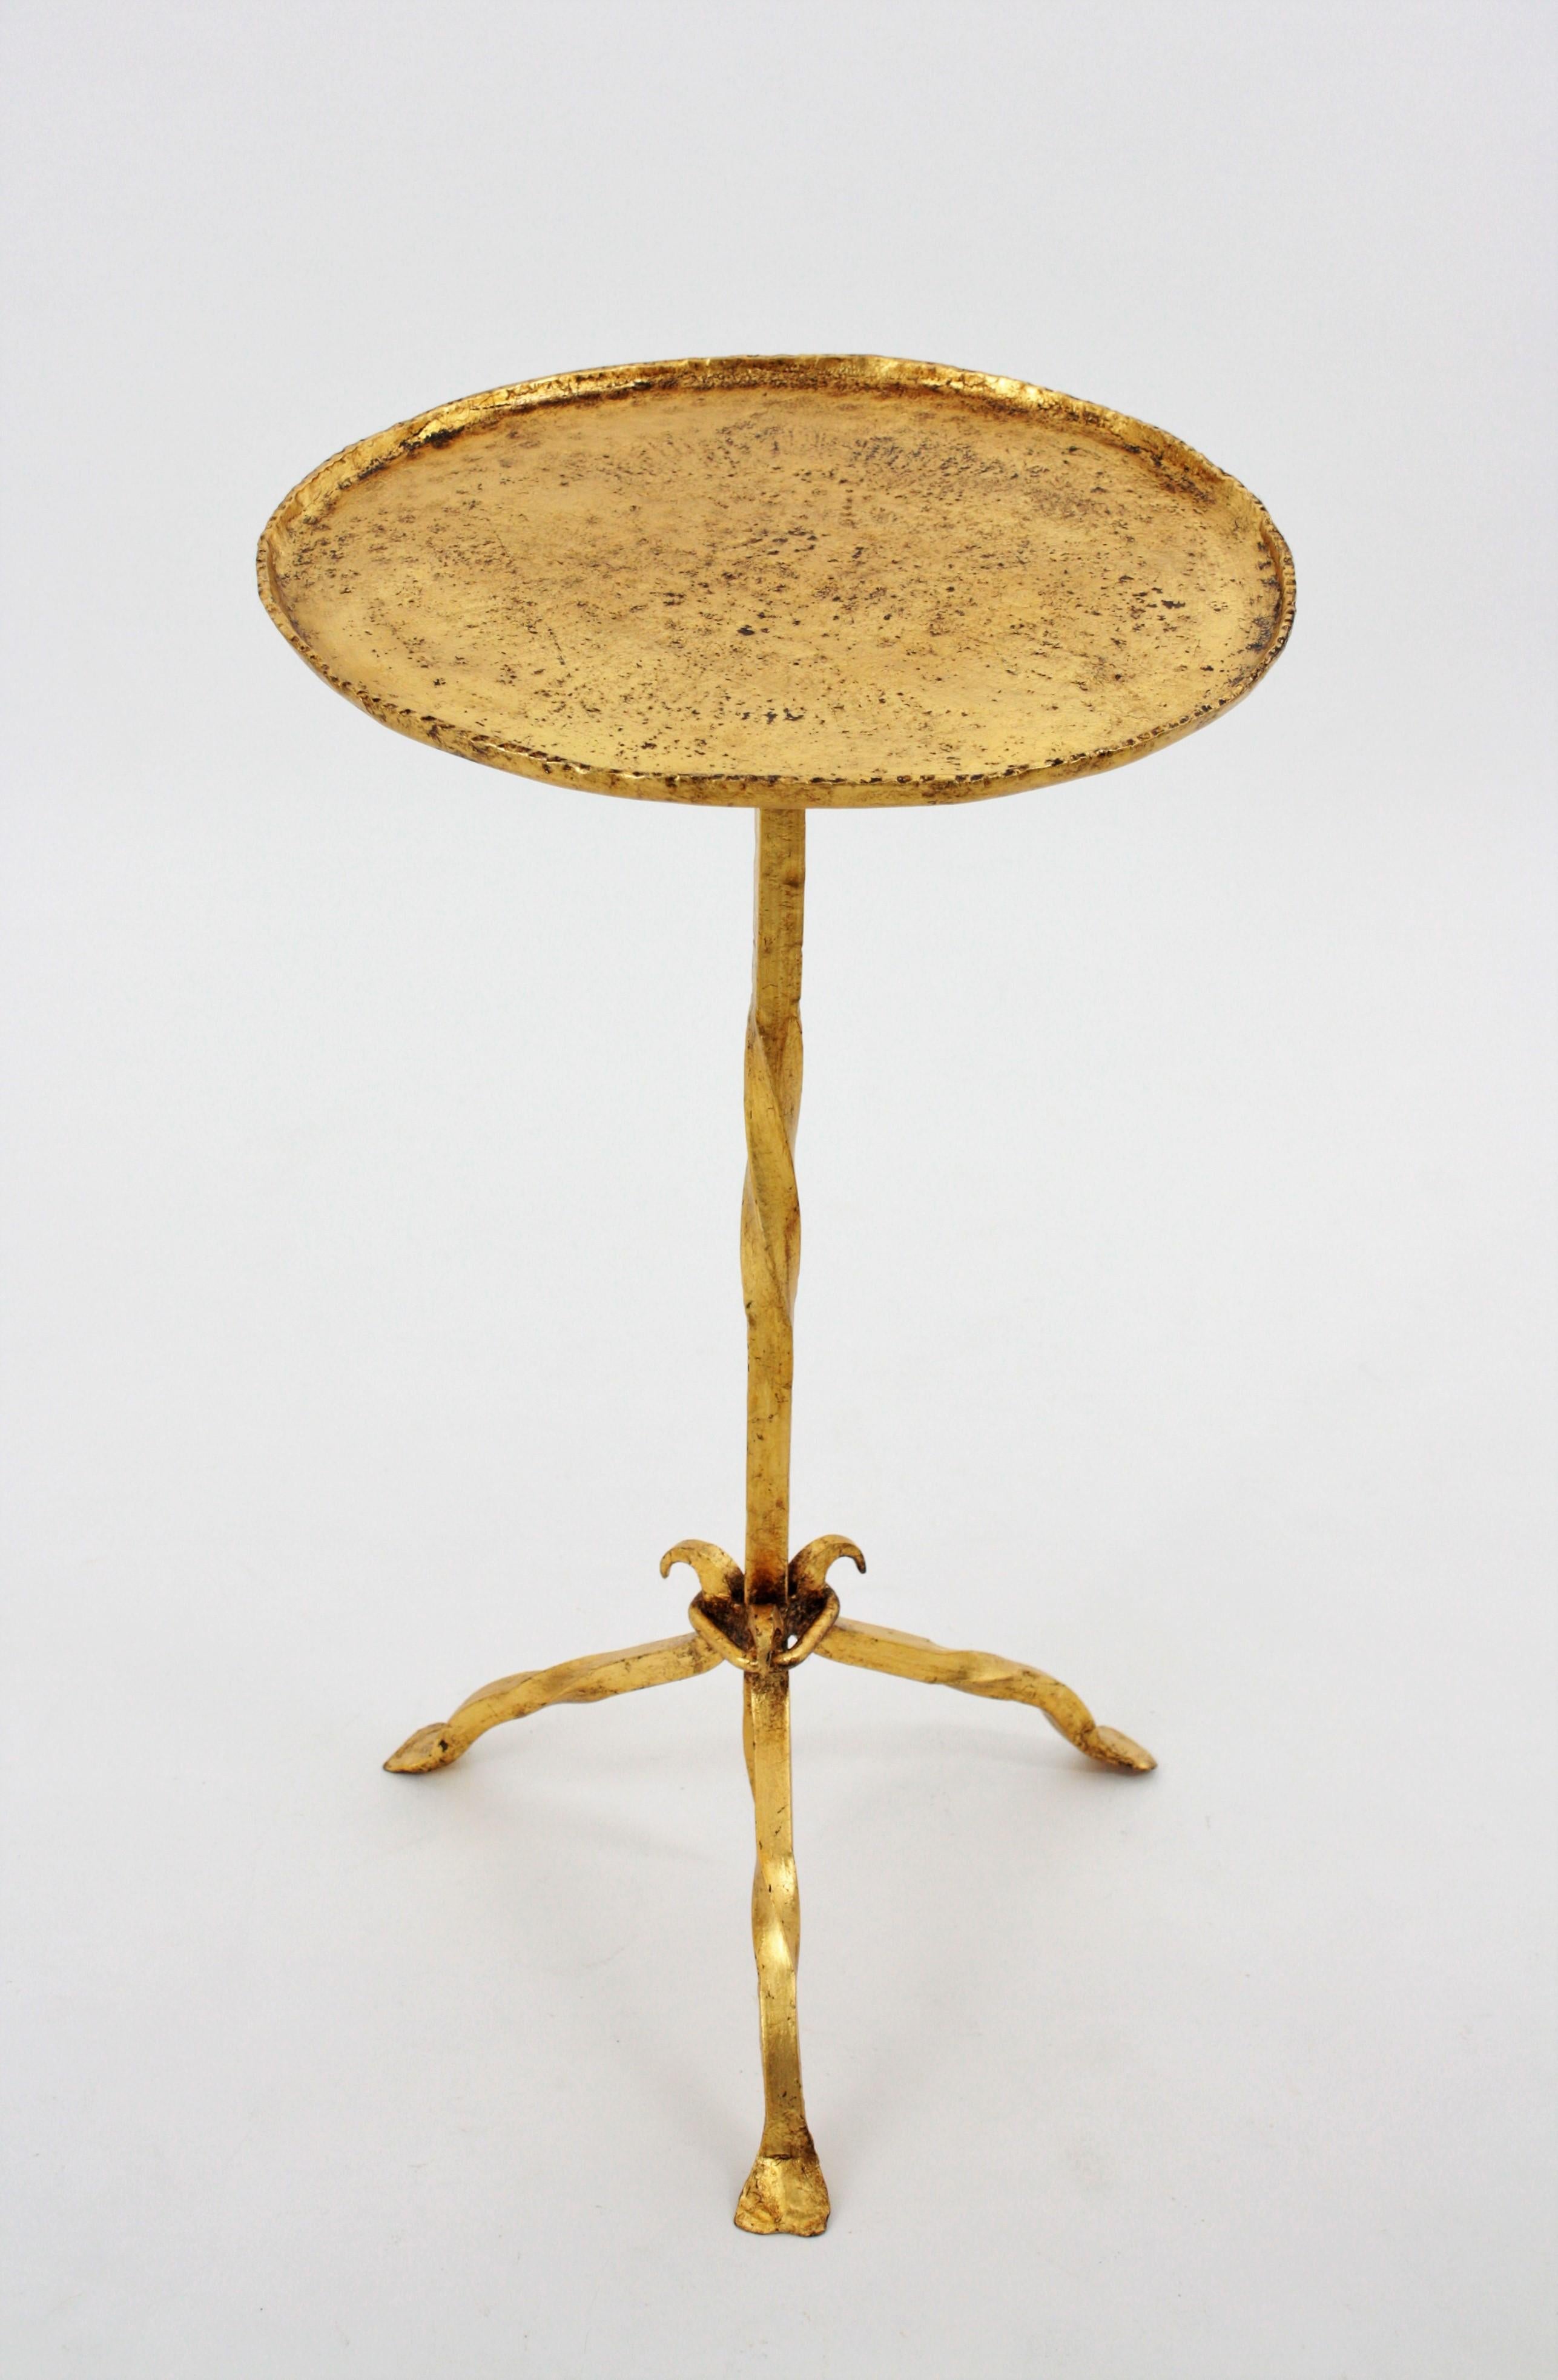 Beautiful hand-hammered gilt iron Gothic style Martini table / gueridon table, side table or stand with gold leaf finish and amazing original patina, Spain, 1940s-1950s.
Very decorative as a side table, coffee table or stand. Useful also as candle